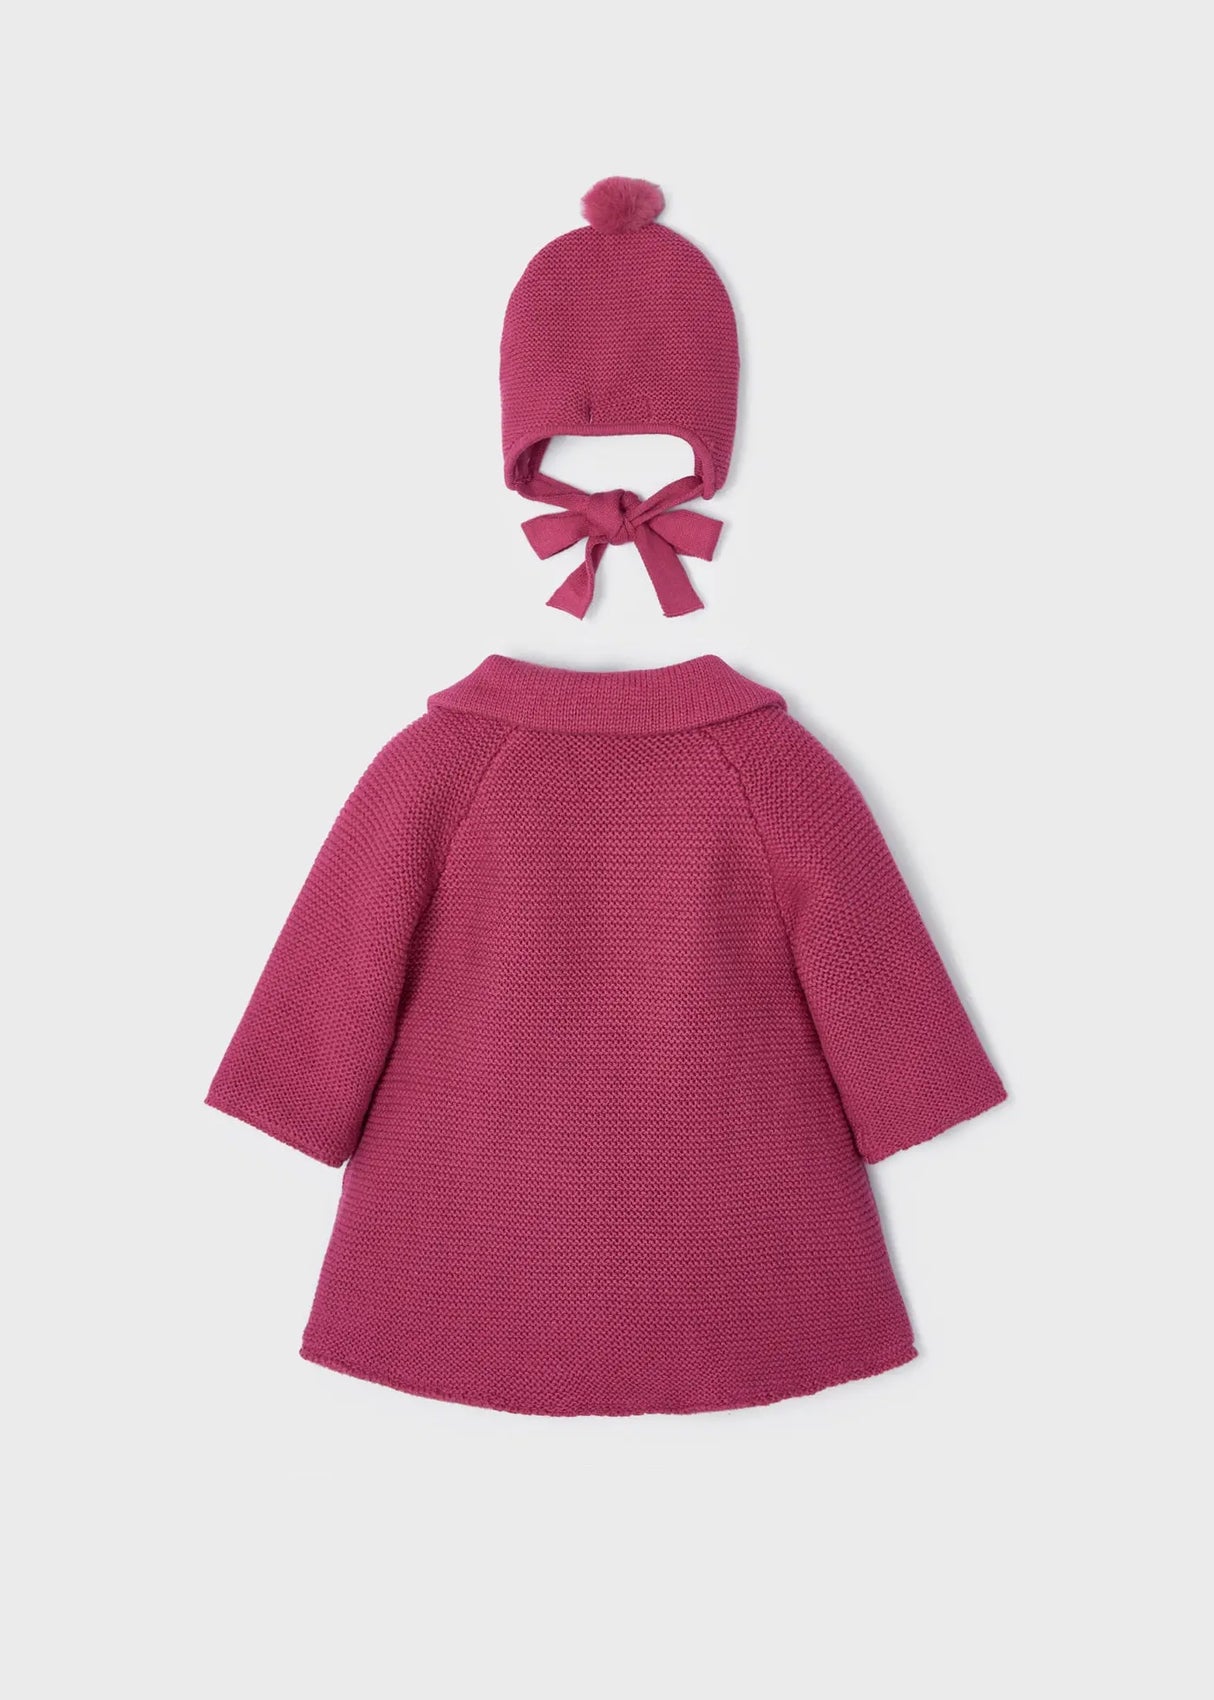 Knitted Coat With Hat Newborn Girl | Mayoral - Mayoral